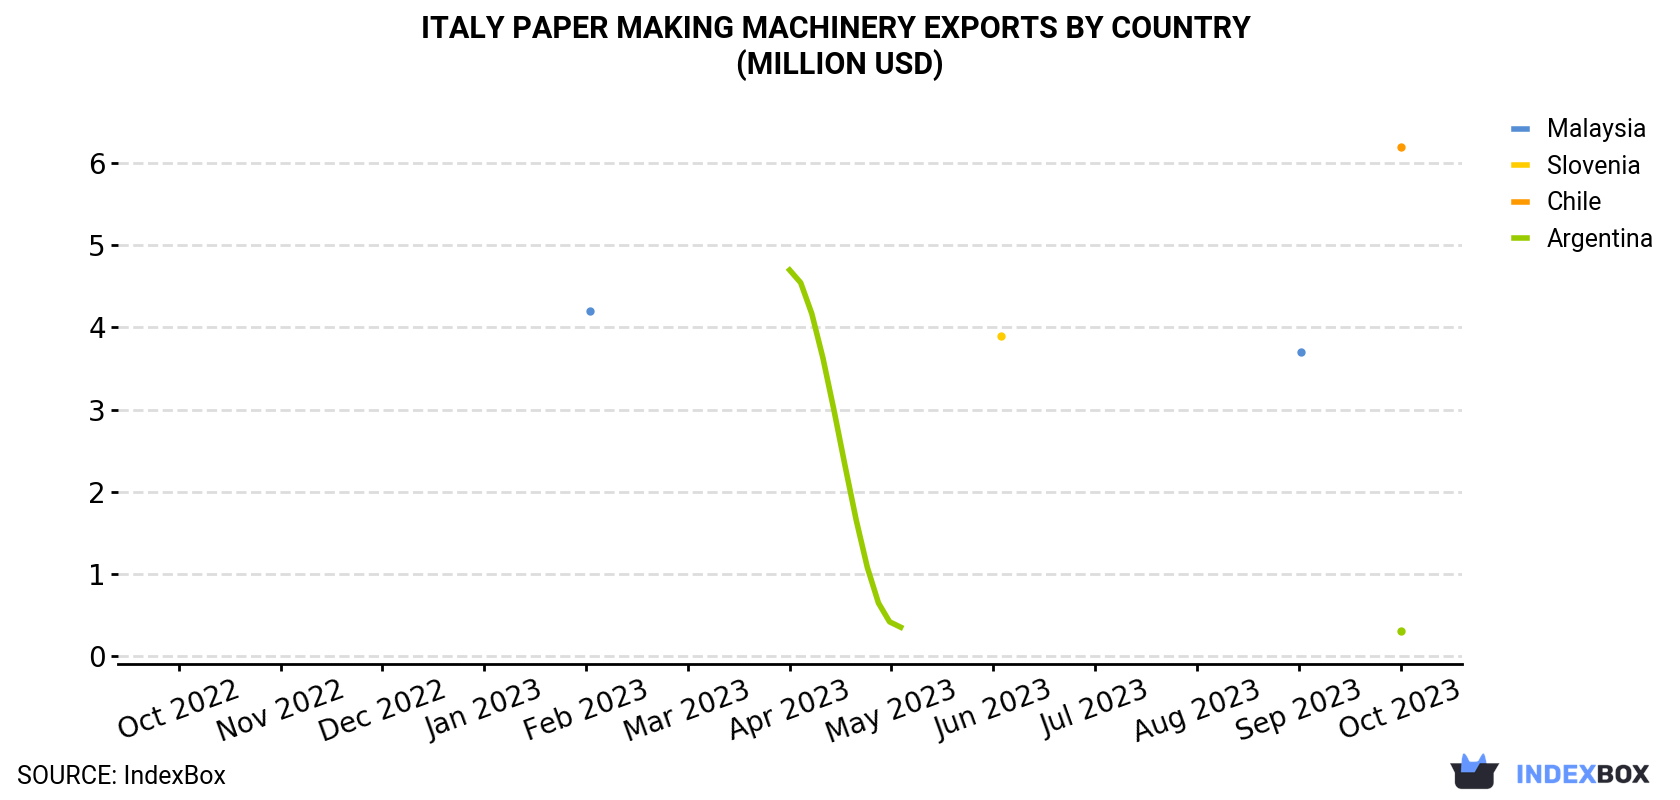 Italy Paper Making Machinery Exports By Country (Million USD)